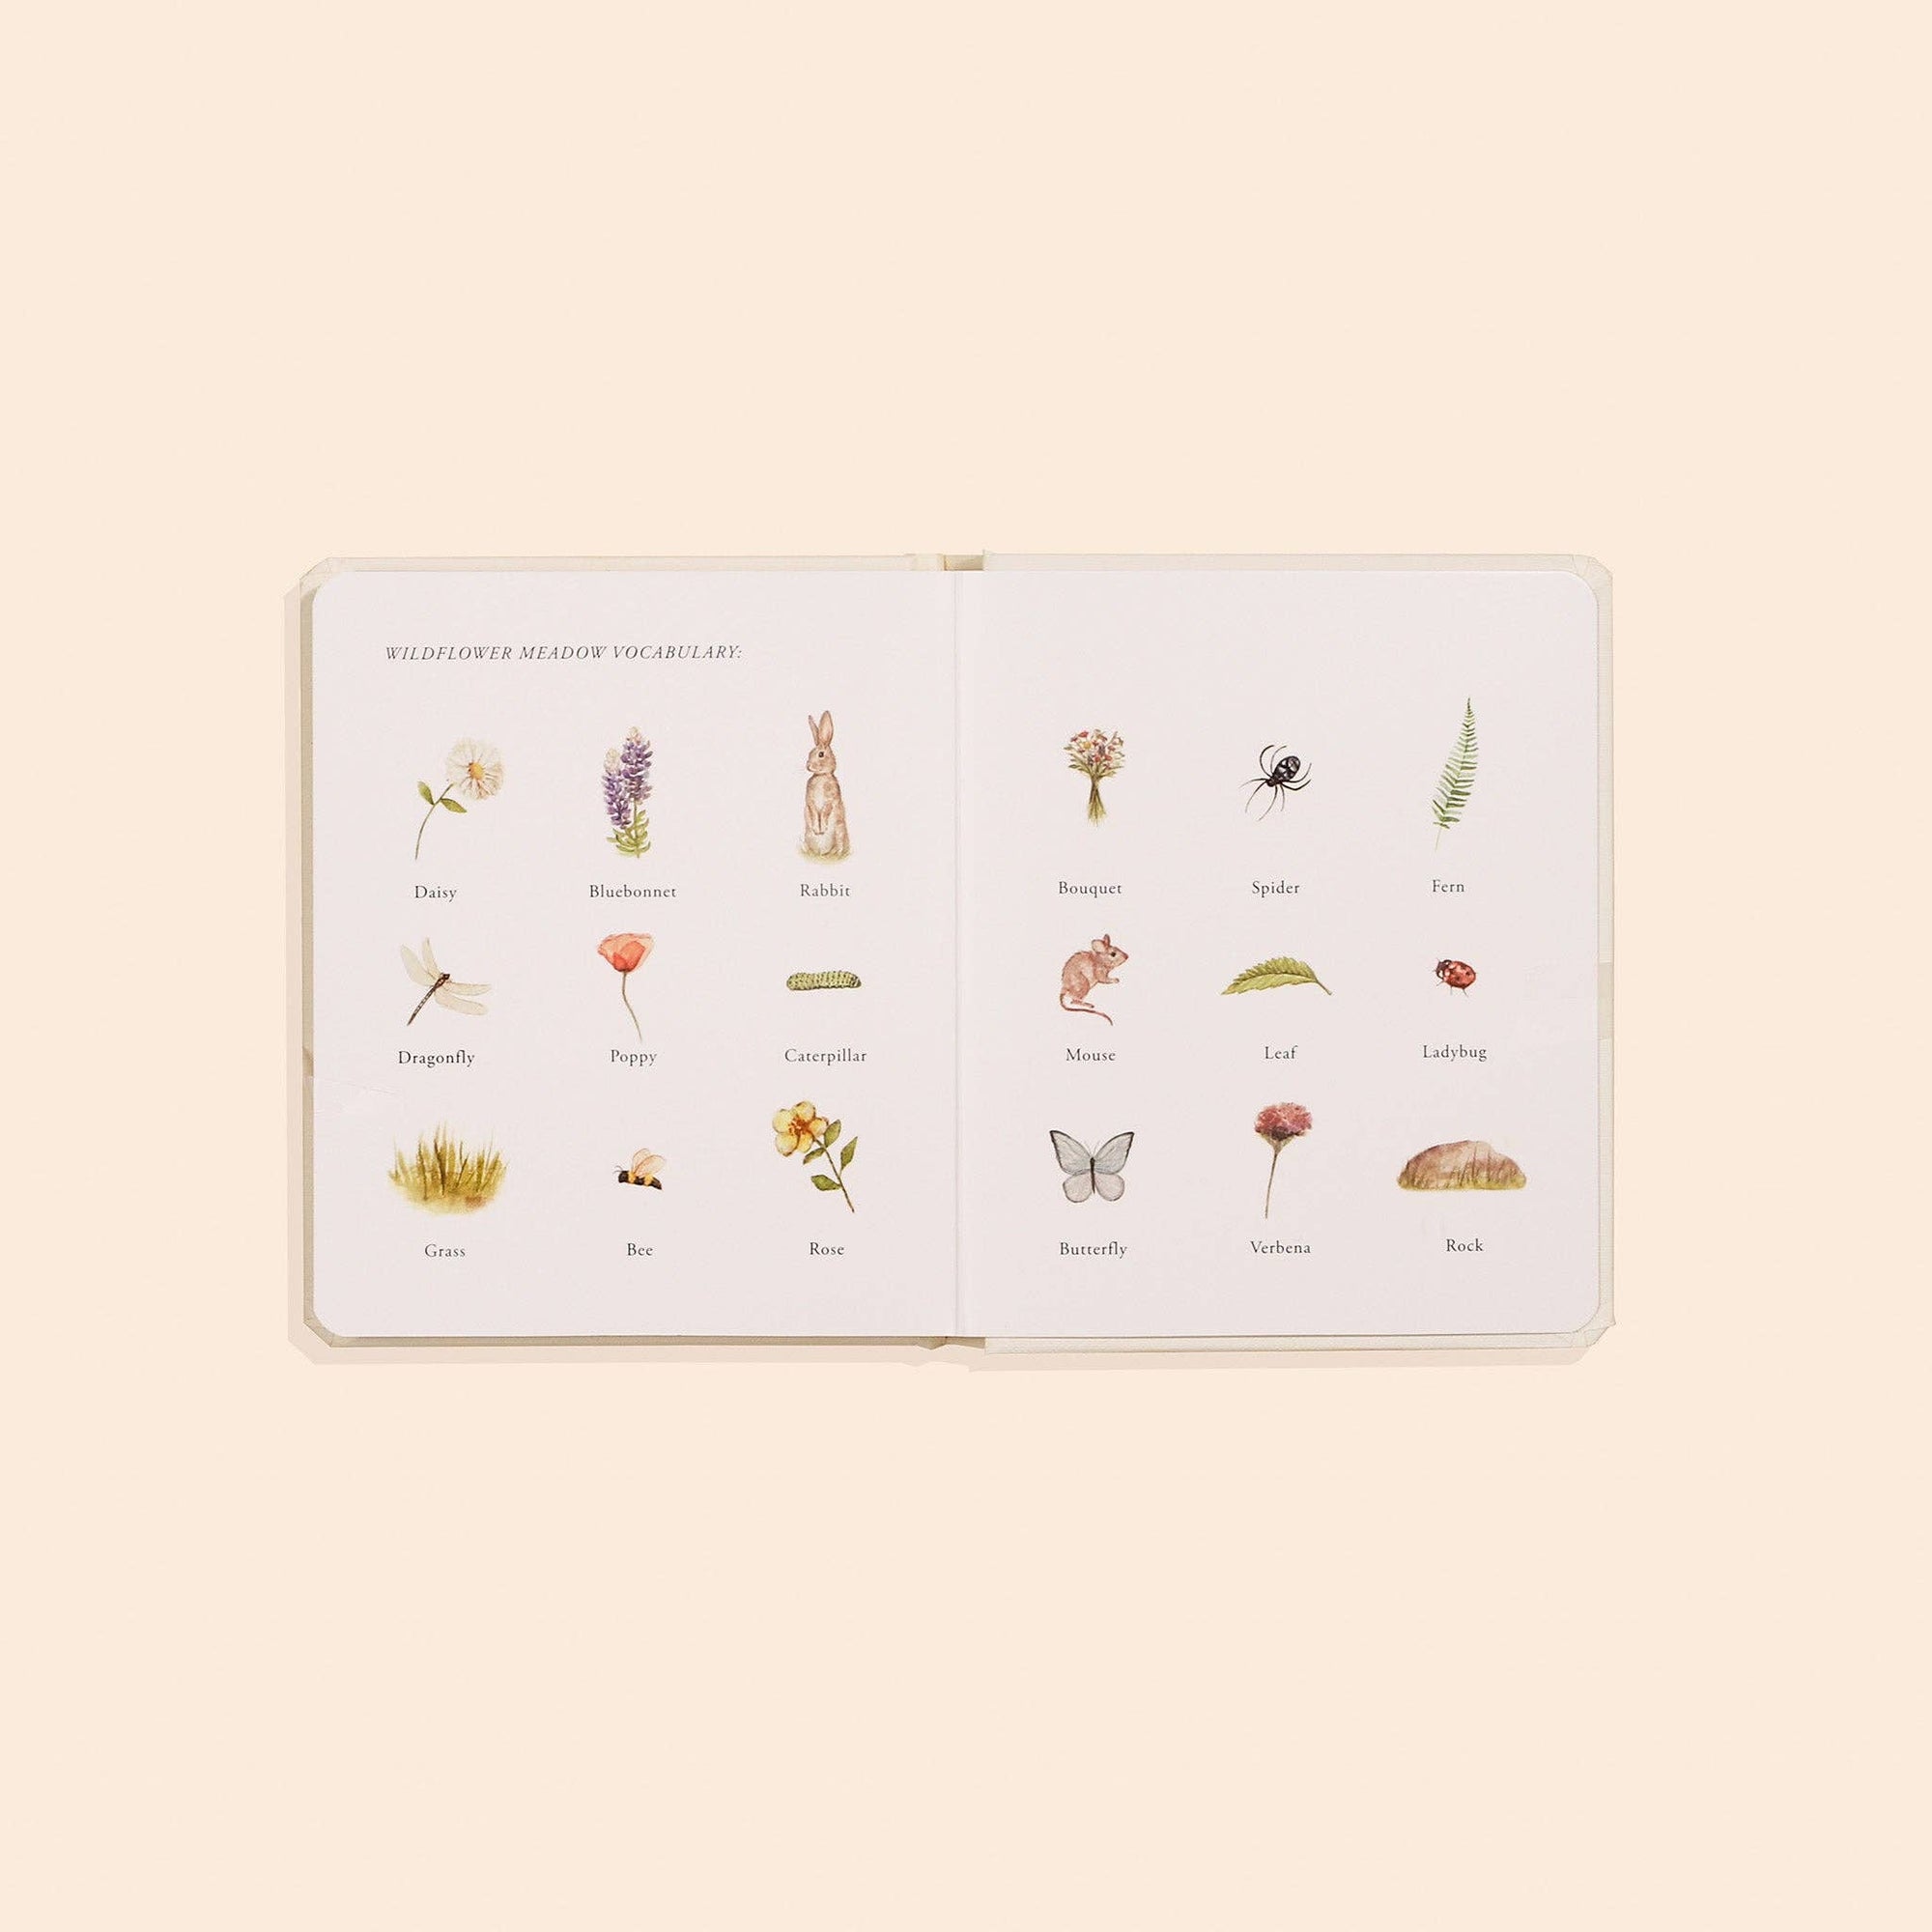 Our Little Adventures Box Set for children featuring enchanting illustrations of flowers and plants, promoting language development through nature exploration.